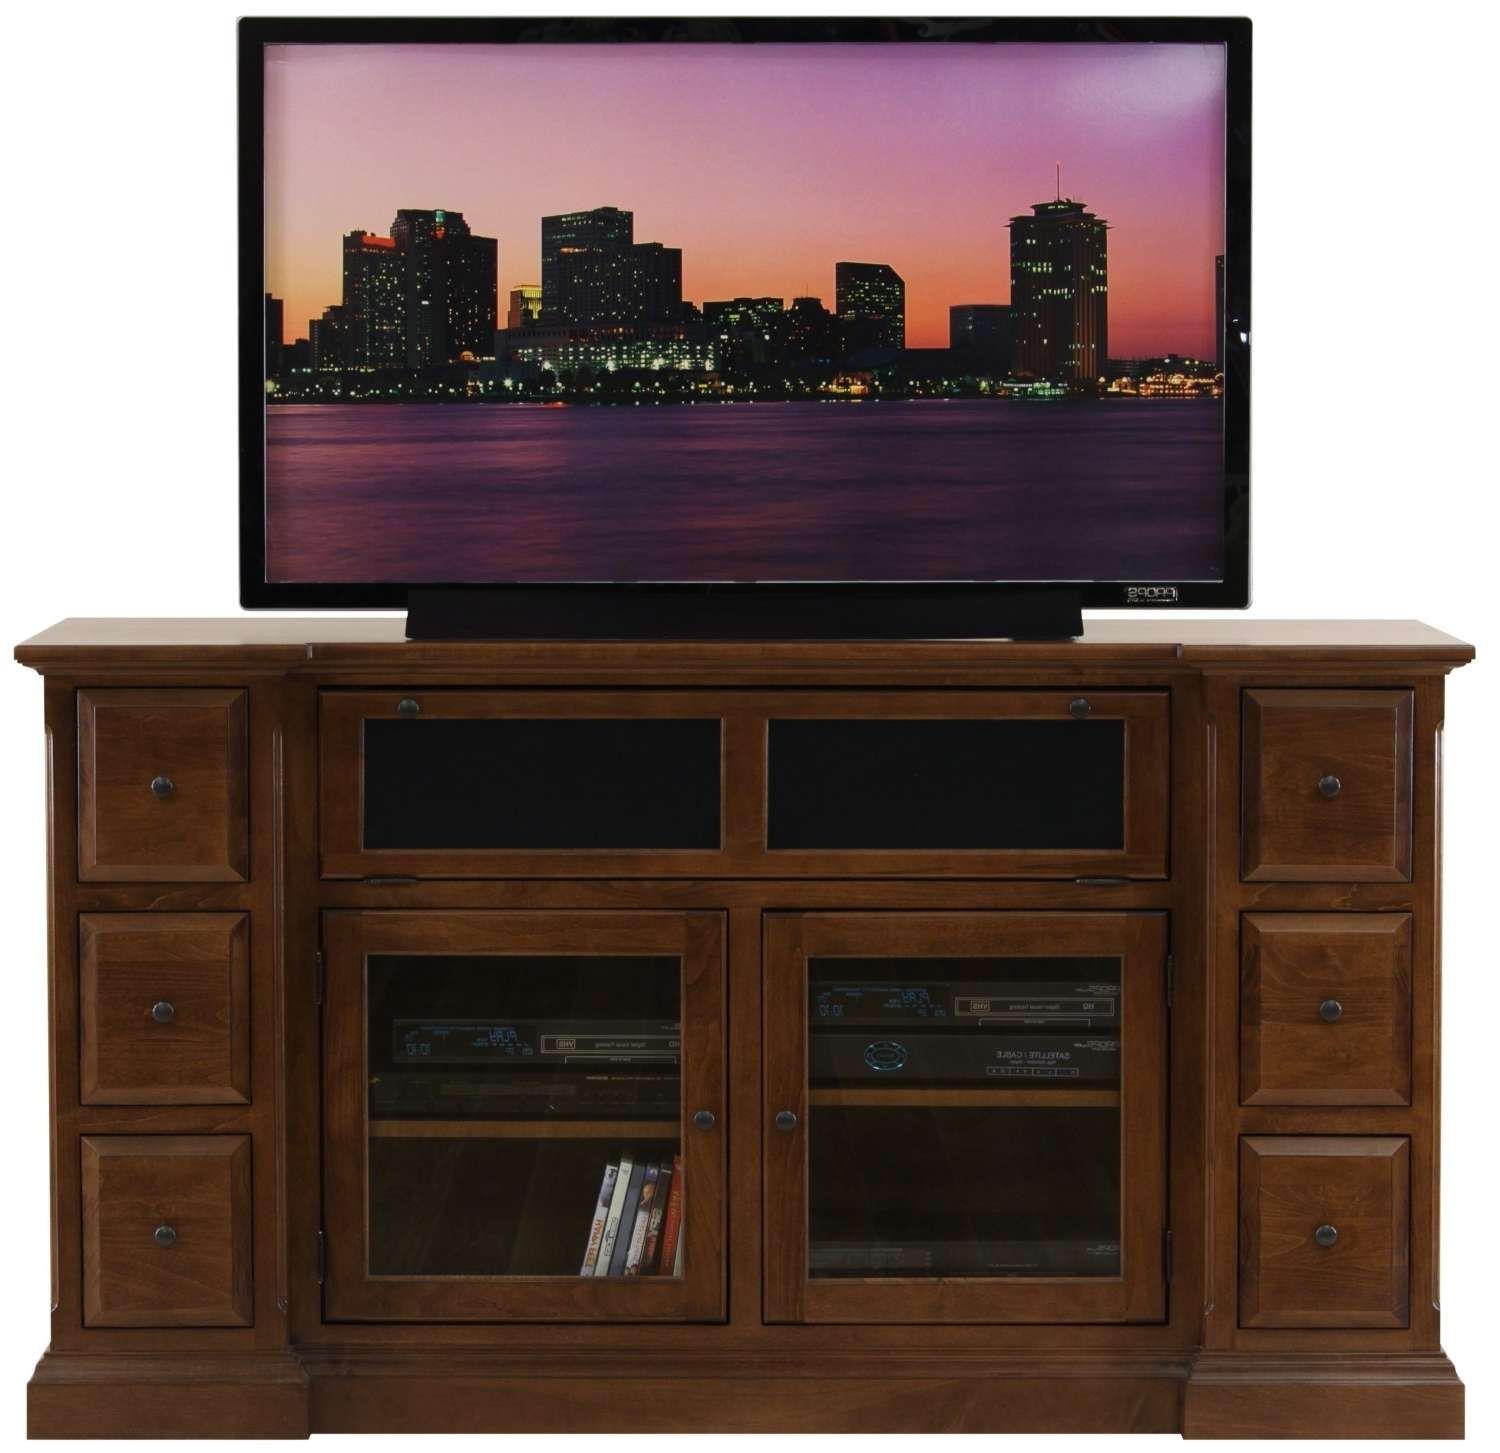 Brown Wooden Tv Stand With Storage With Glass Doors Combined With With Regard To Wooden Tv Stands With Doors (View 1 of 15)